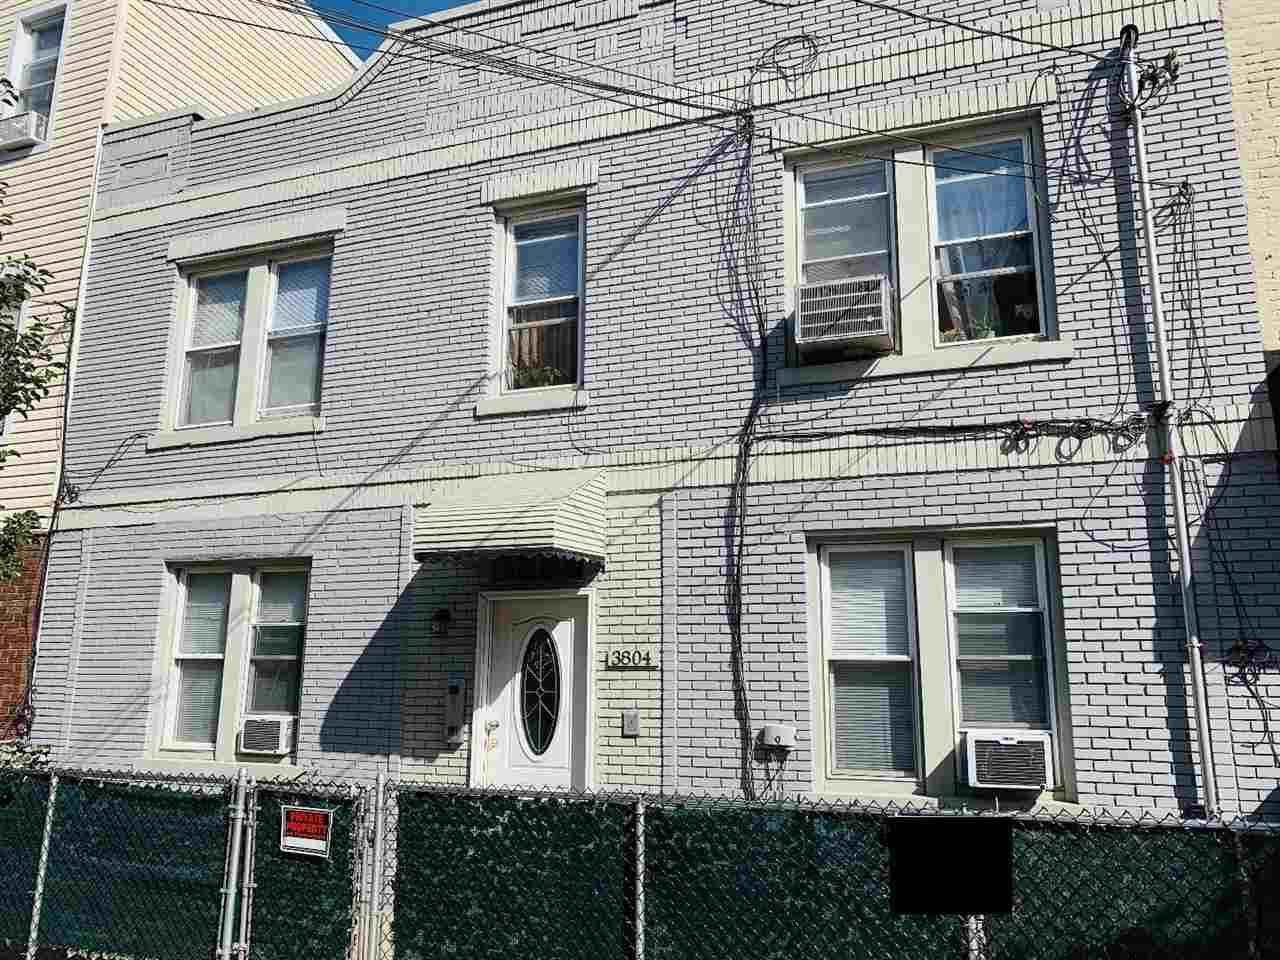 3804 PALISADE AVE Multi-Family New Jersey